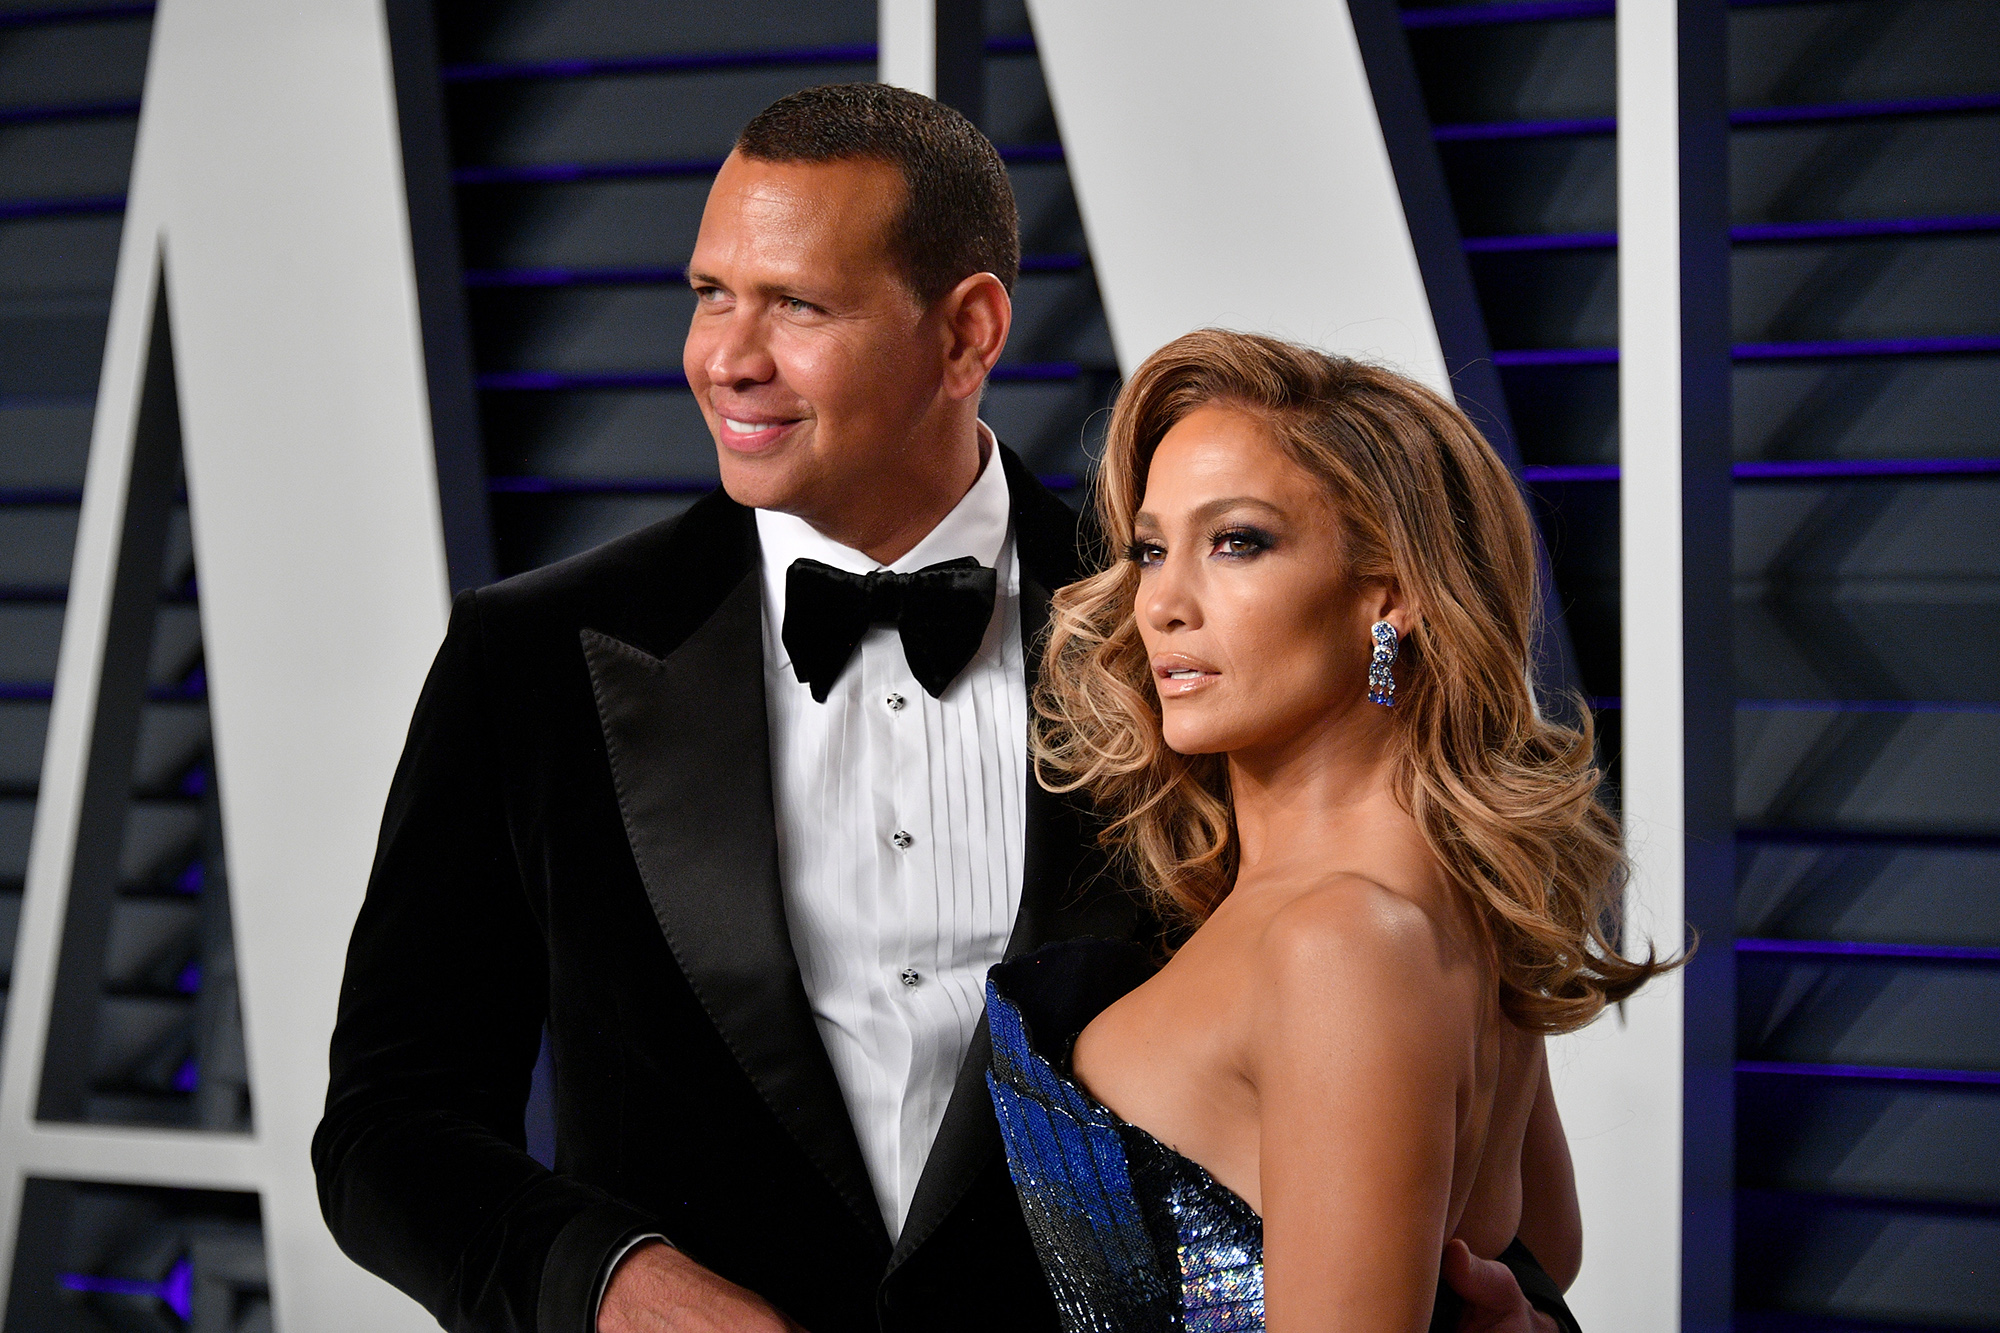 J-Rod Done: Lopez, Rodriguez Call Off 2-year Engagement - Bloomberg